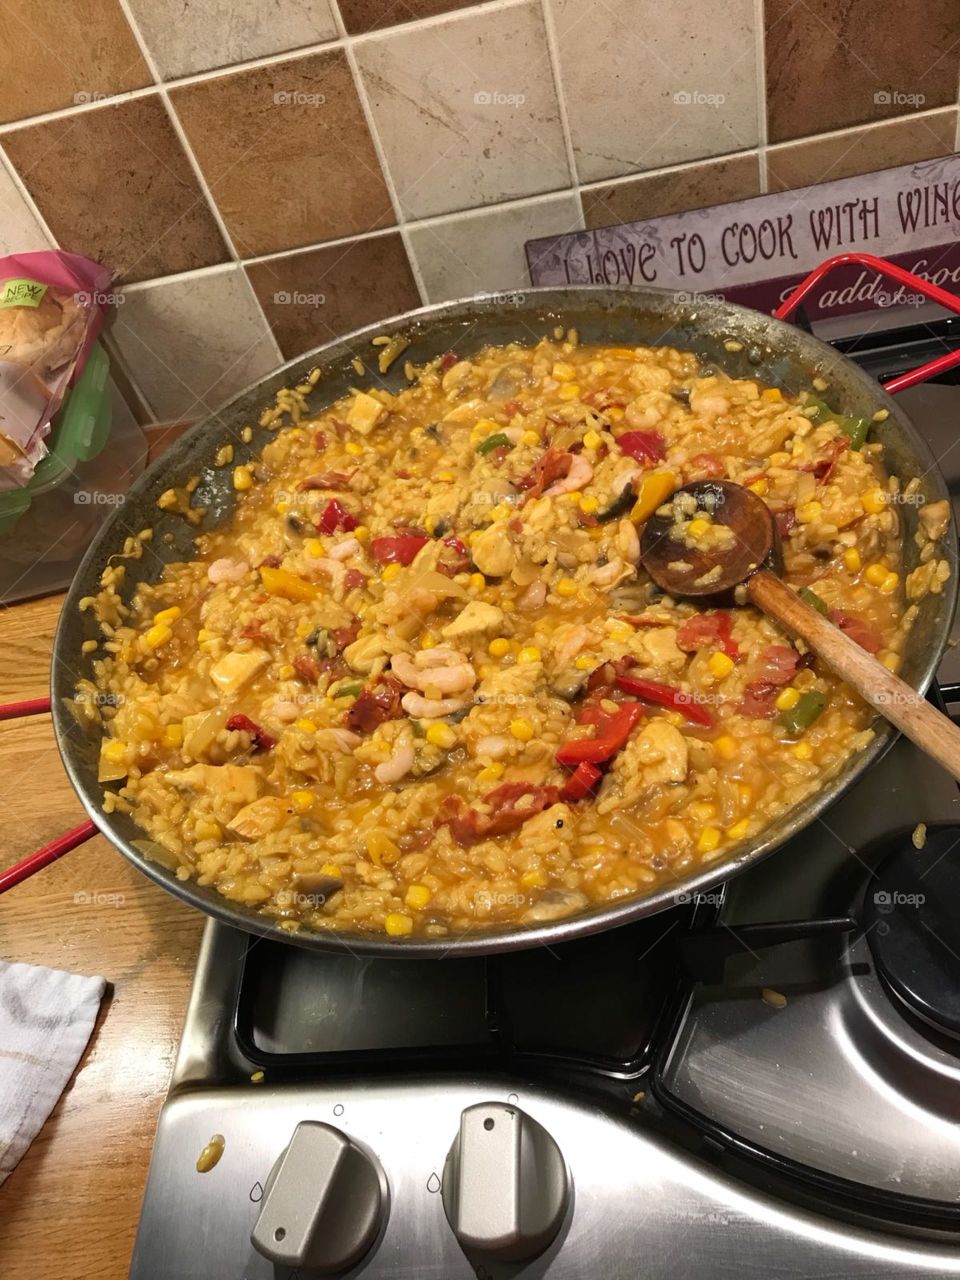 Paella cooking on the stove in kitchen with wooden spoon. 